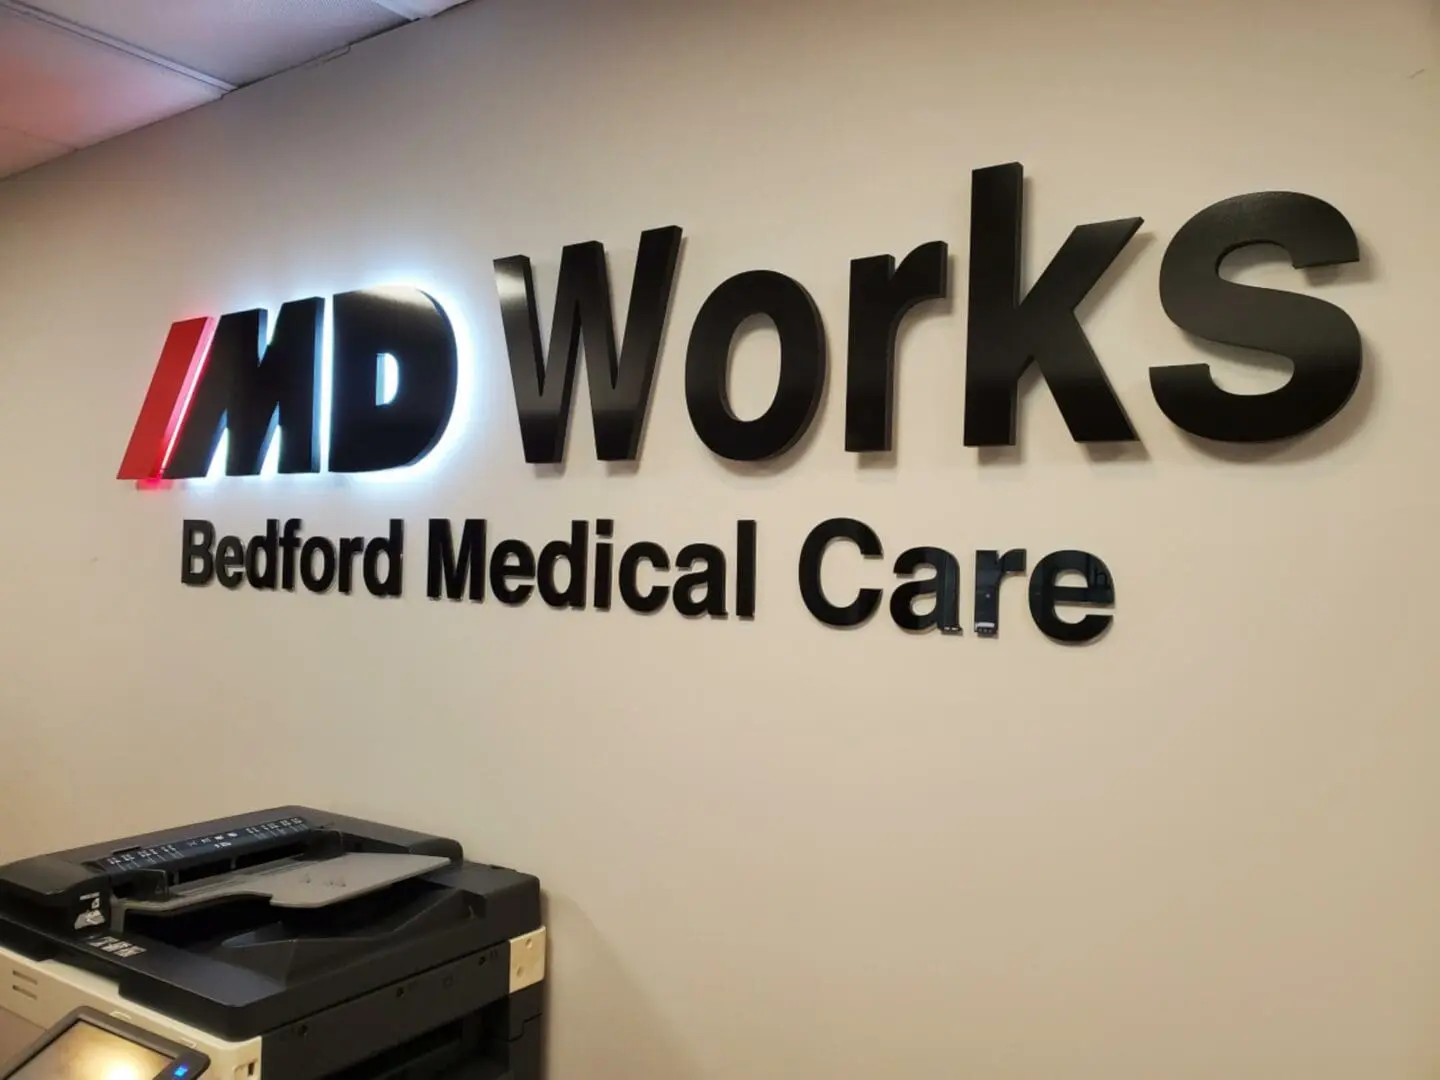 A sign that says md works bedford medical care.